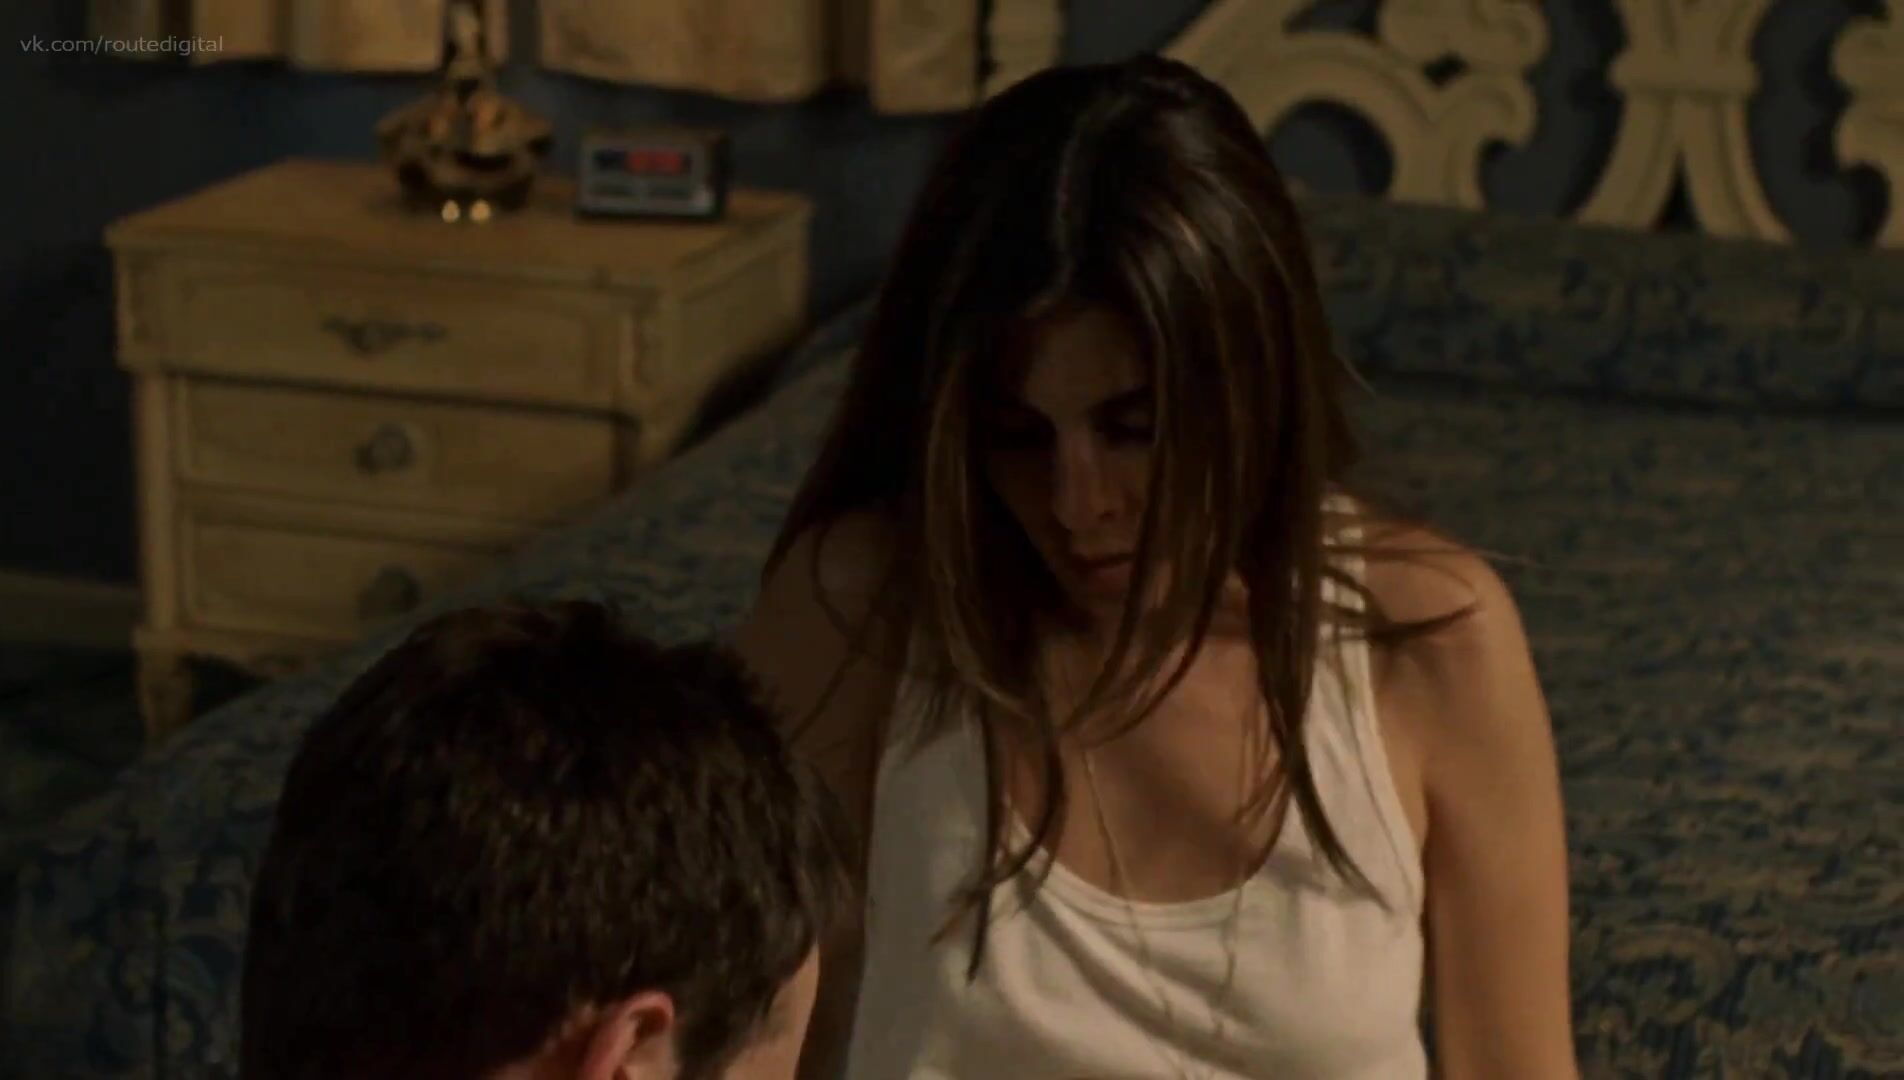 Dykes Jamie Lynn Sigler nude love for sex isn't a secret anymore so she fools around in movie Pene - 2